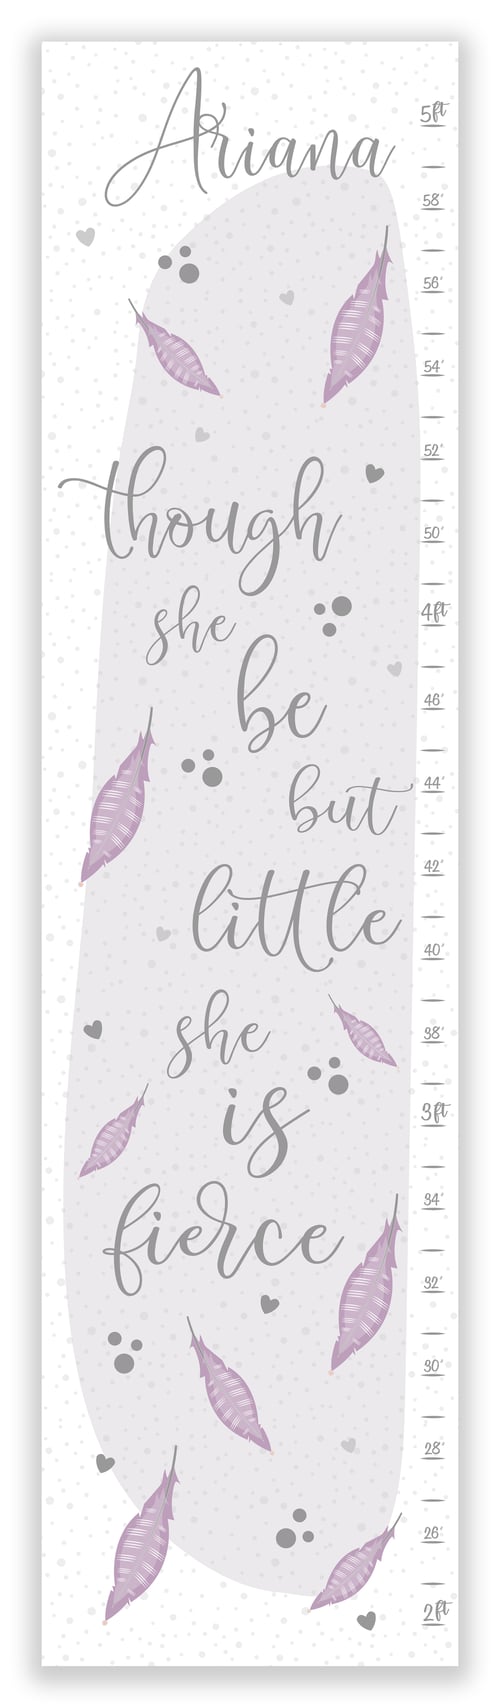 Image of Though She Be But Little Feathers Personalized Canvas Growth Chart